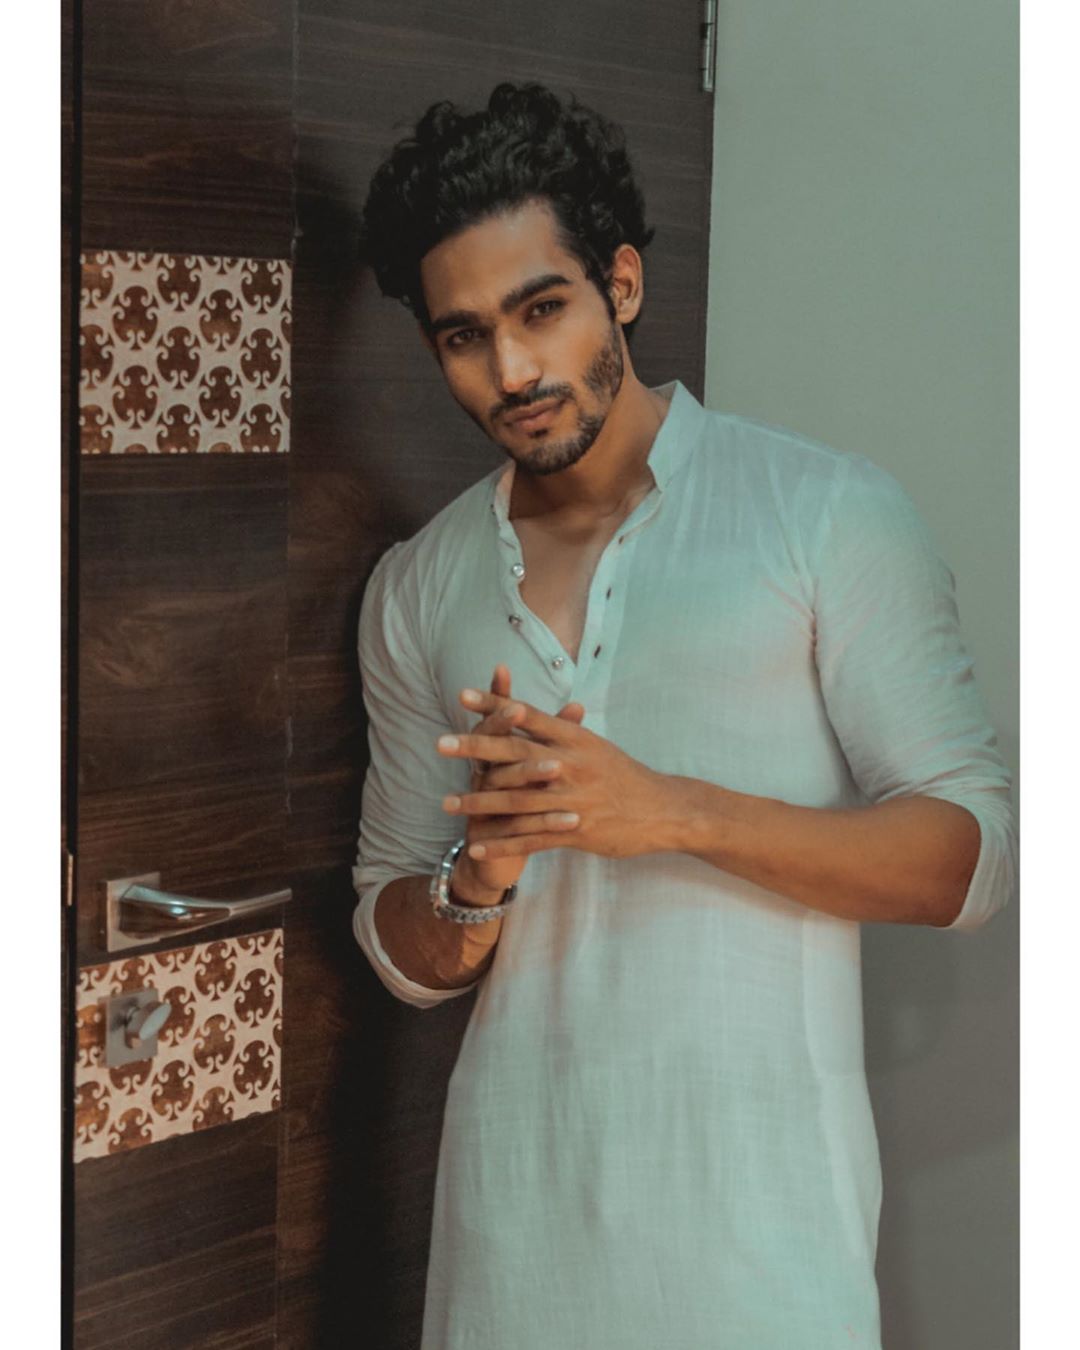 MYNTRA - A basic white kurta is the most versatile piece of clothing every guy must own. 
📸 @aagazakhtar_
Look up style code: 2127213 / 11723734
For more on-point looks, styling hacks and fashion advi...